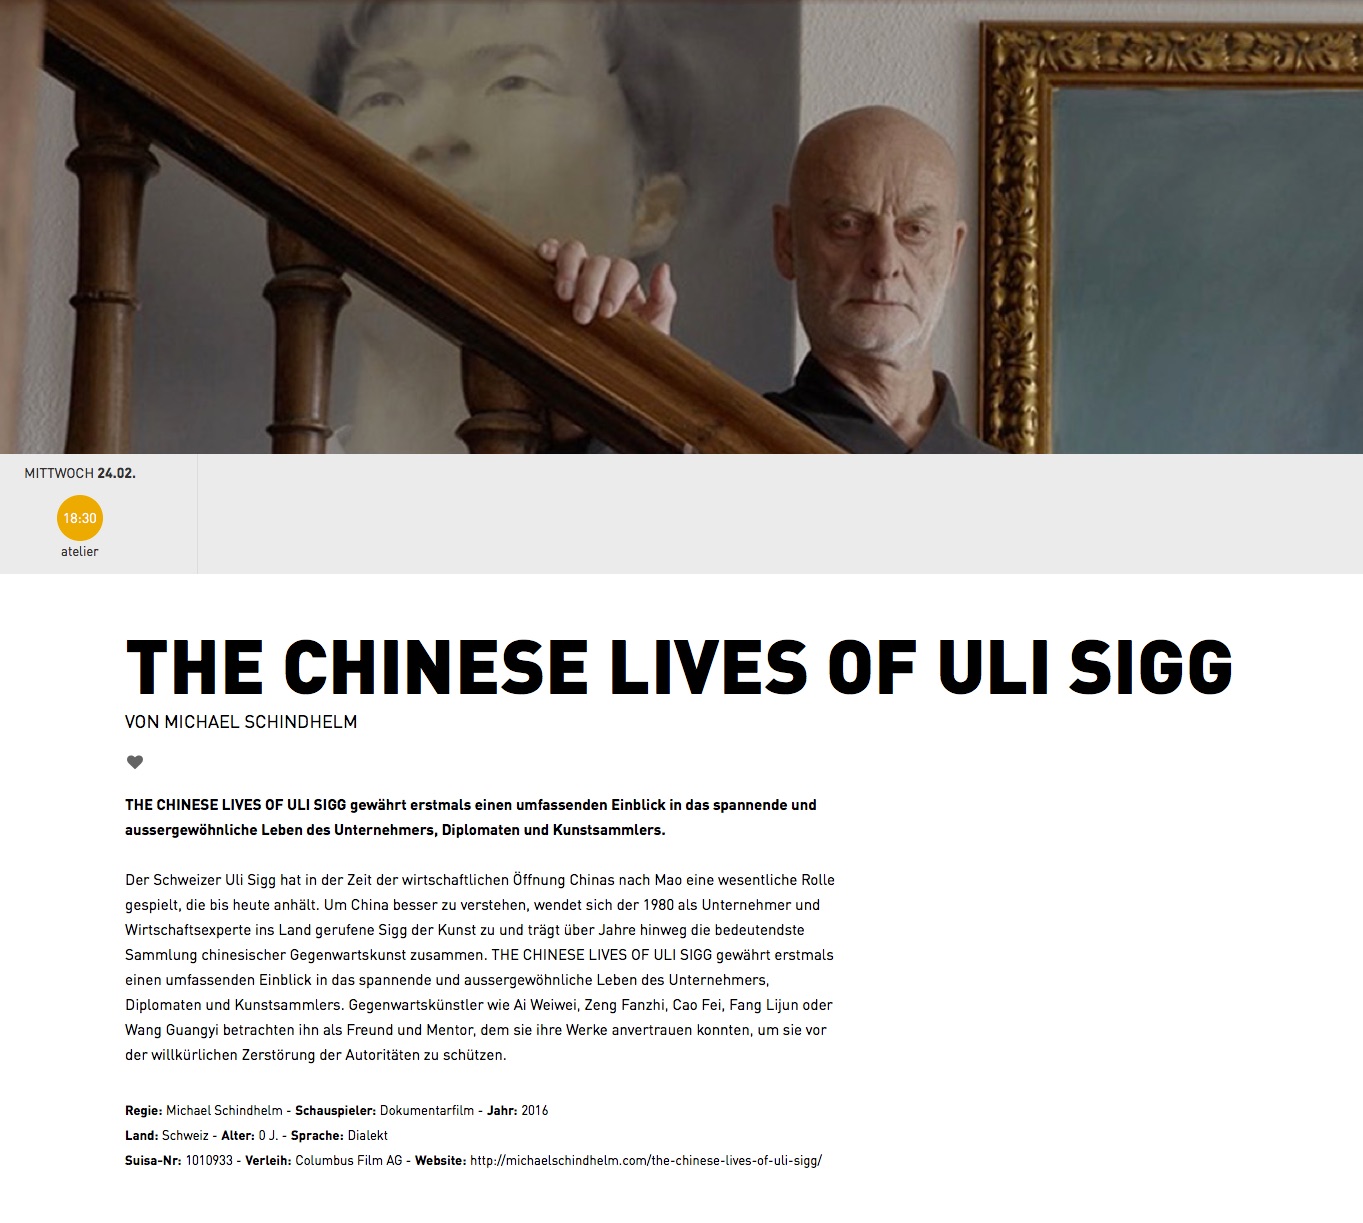 The Chinese lives of Ueli Sigg